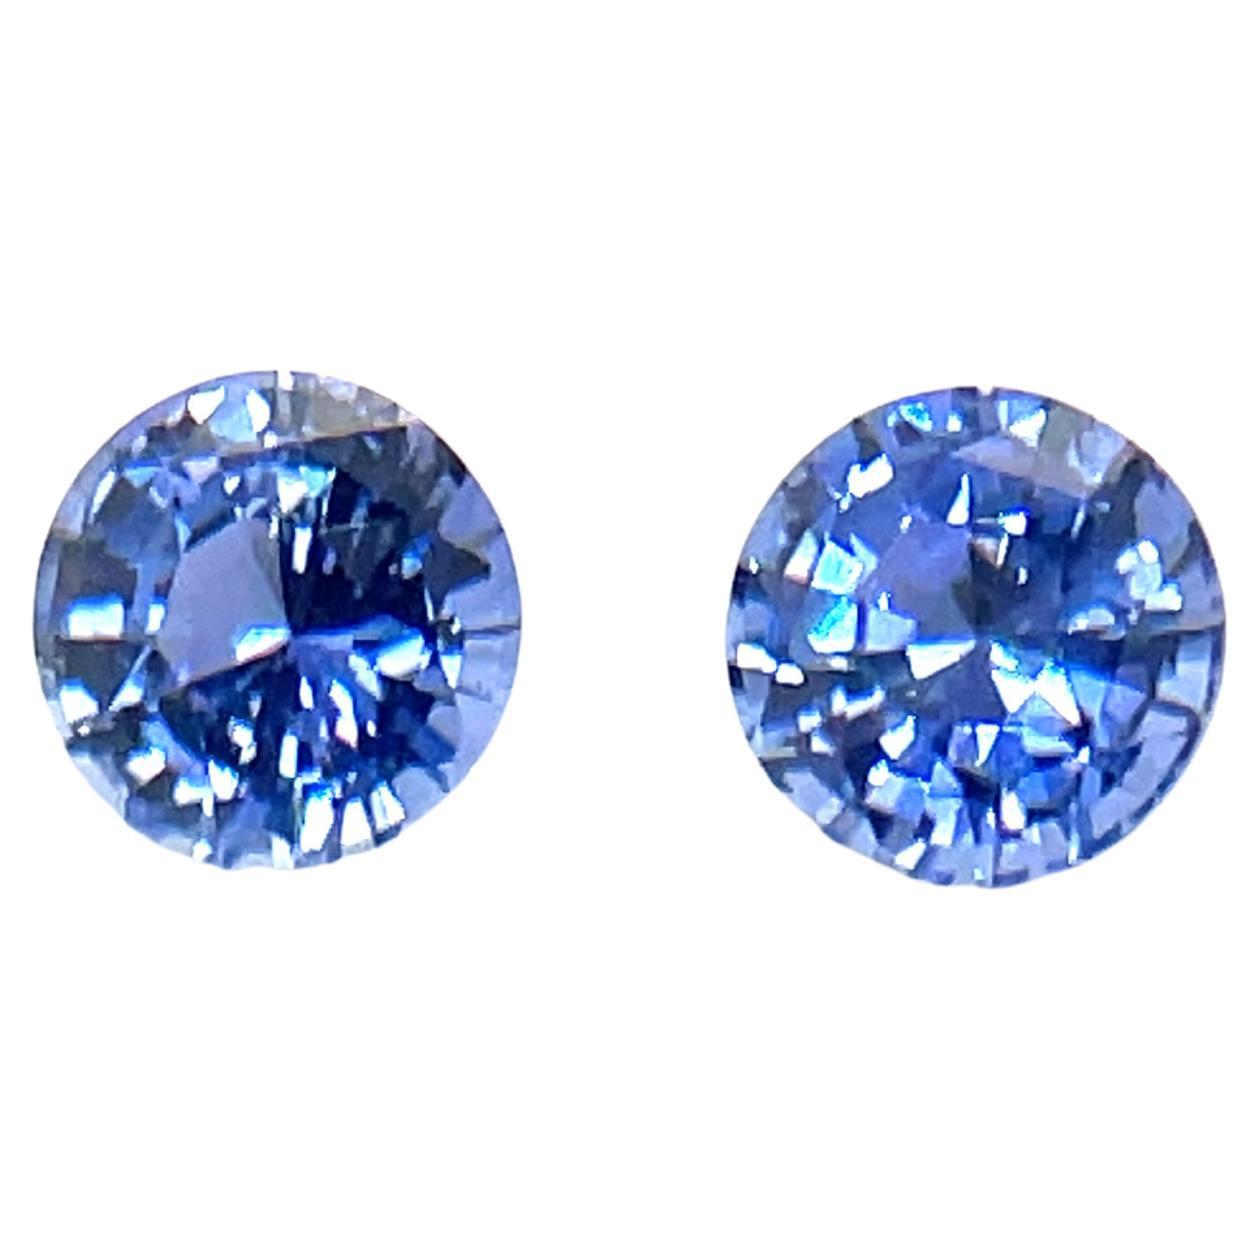 2 Natural Round Diamond-Cut Blue Sapphires Cts 1.21 For Sale